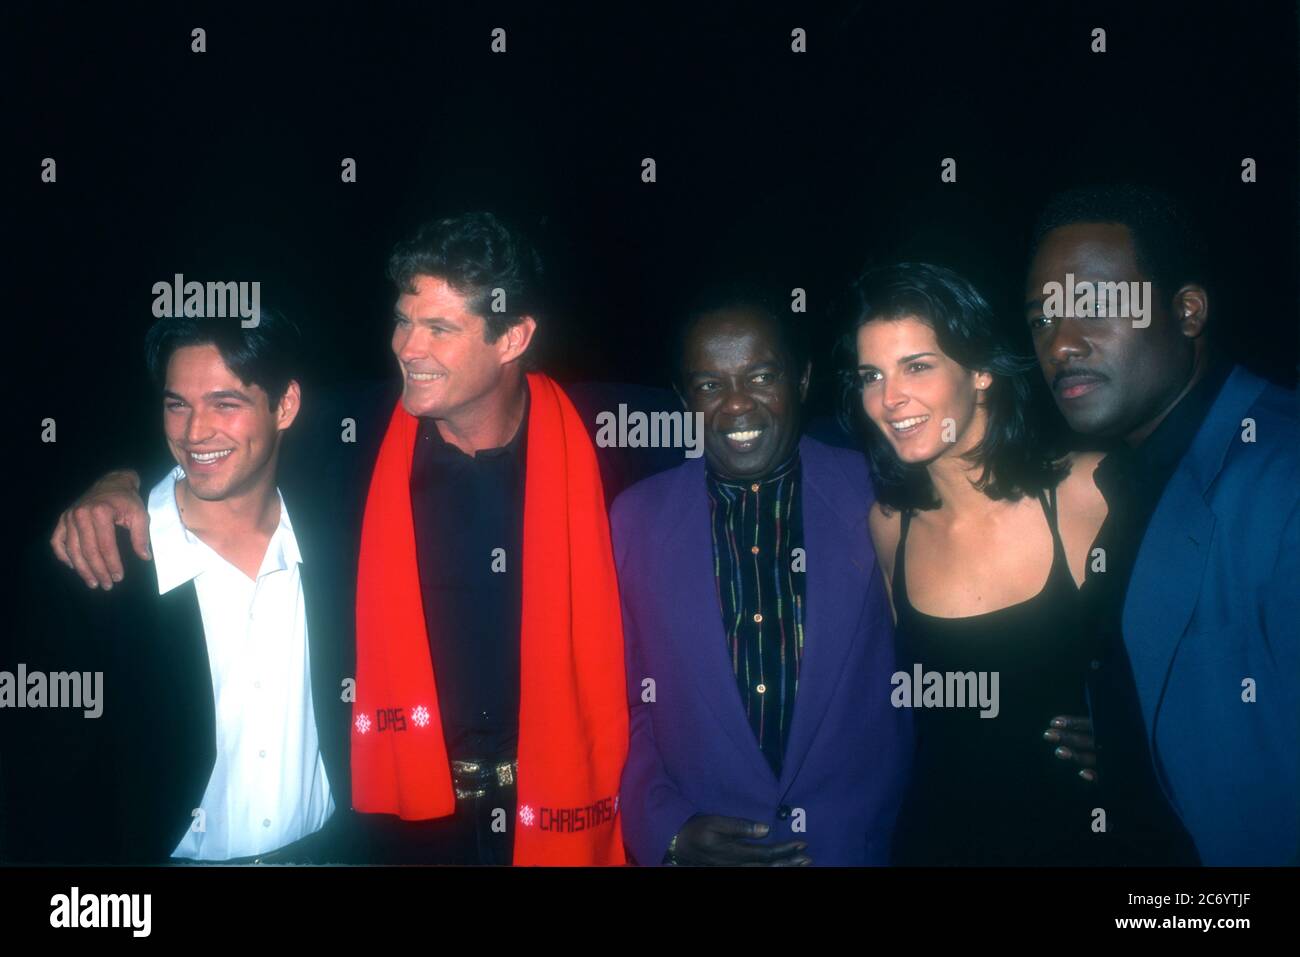 Universal City, California, USA 15th December 1995 (L-R) Actor Eddie Cibrian, actor David Hasselhoff, singer Lou Rawls, actress Angie Harmon and actor Gregory Alan Williams attend Baywatch & Baywatch Nights Holiday Party on December 15, 1995 at B.B. King's Blues Club in Universal City, California, USA. Photo by Barry King/Alamy Stock Photo Stock Photo